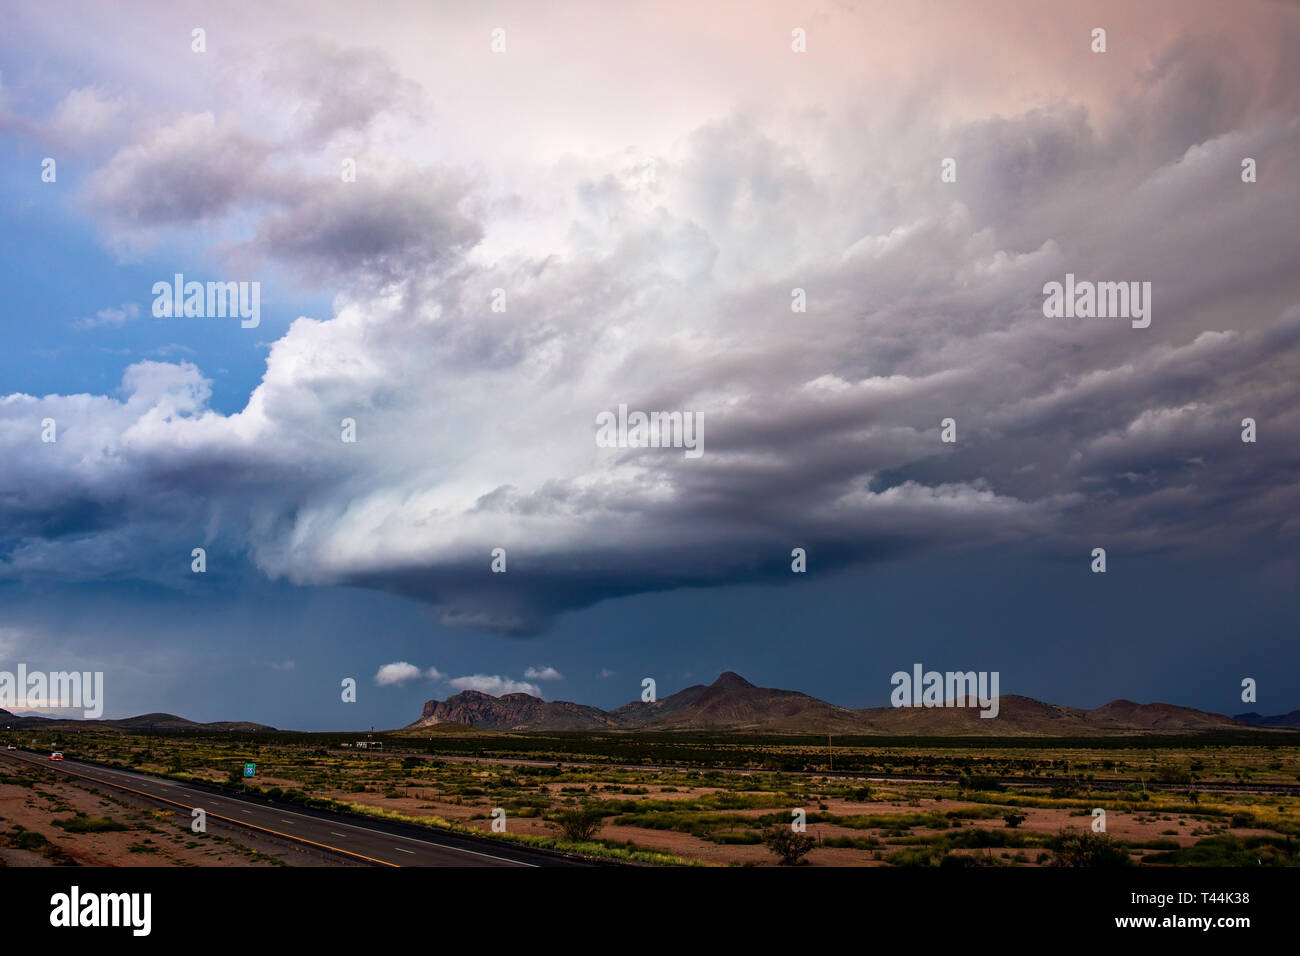 A low precipitation supercell thunderstorm over the mountains southwest of Lordsburg, New Mexico Stock Photo